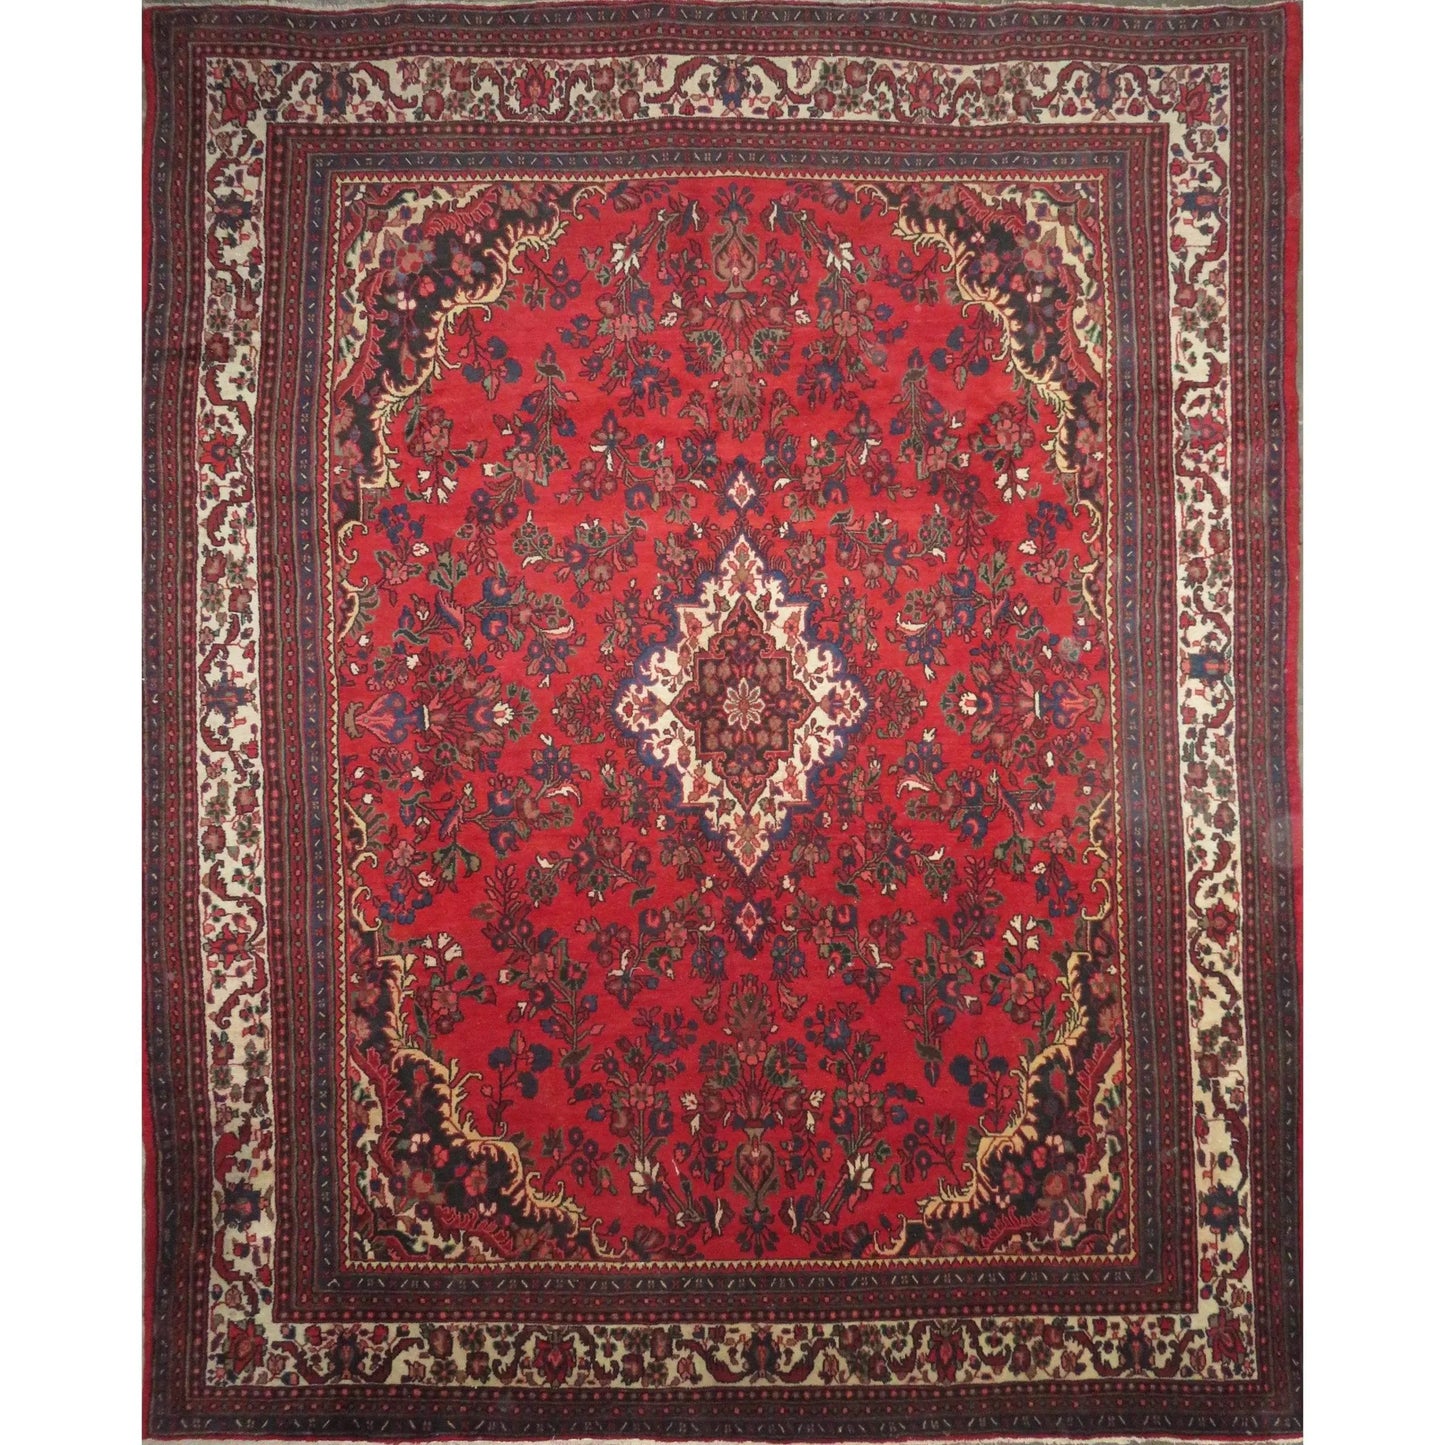 Hand-Knotted Persian Wool Rug _ Luxurious Vintage Design, 12'6" x 10'2", Artisan Crafted